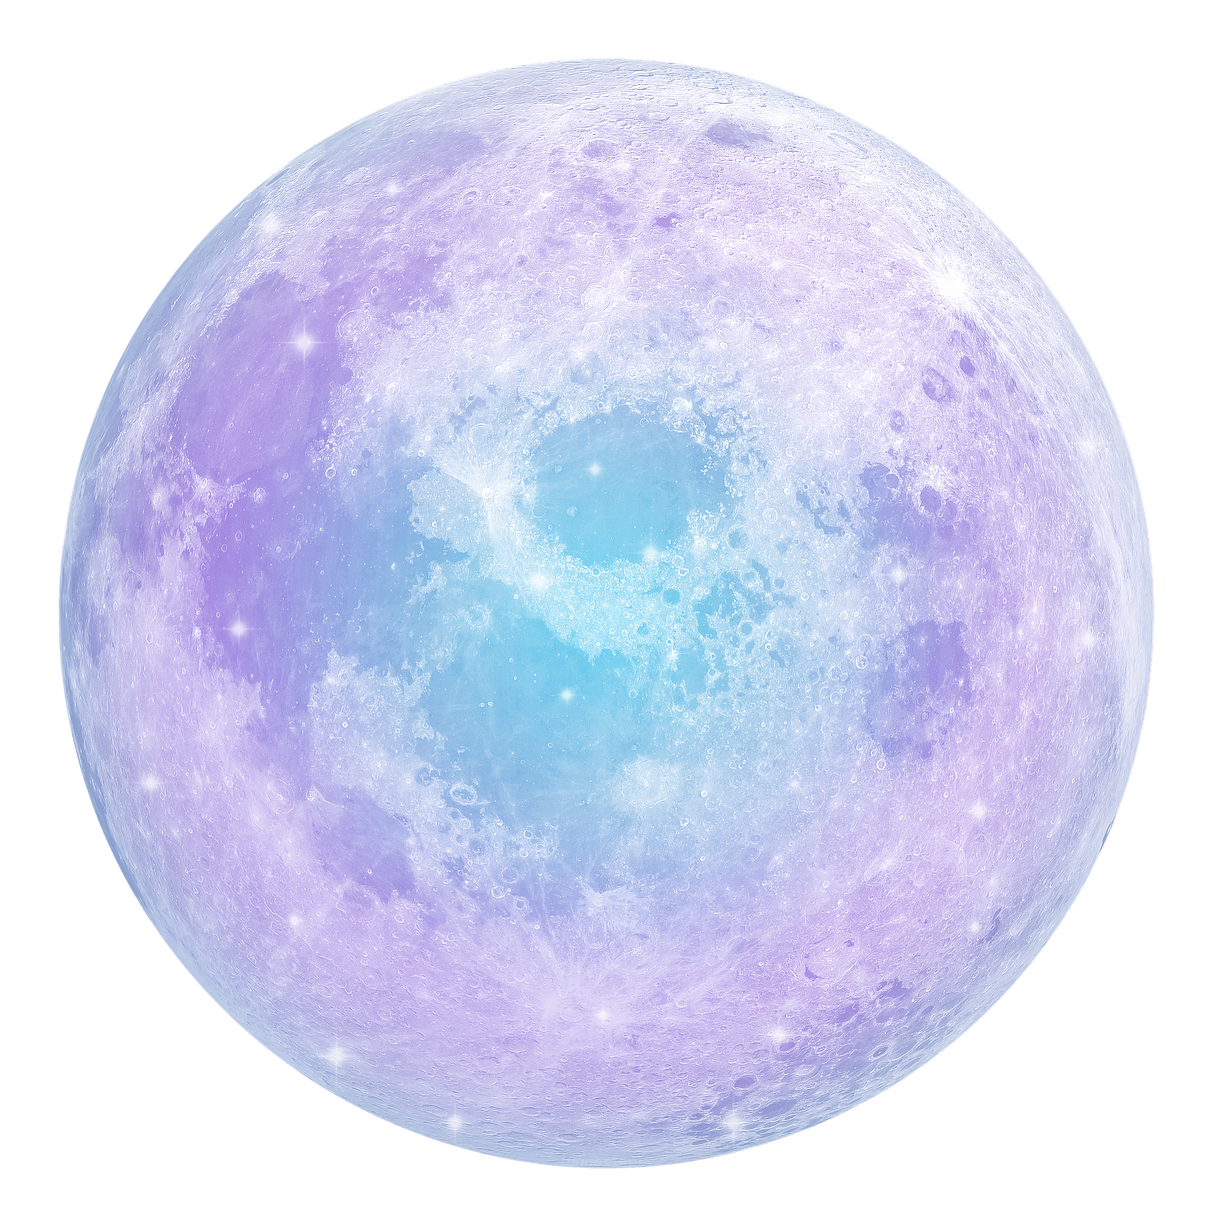 A Moon With A Blue And Purple Surface